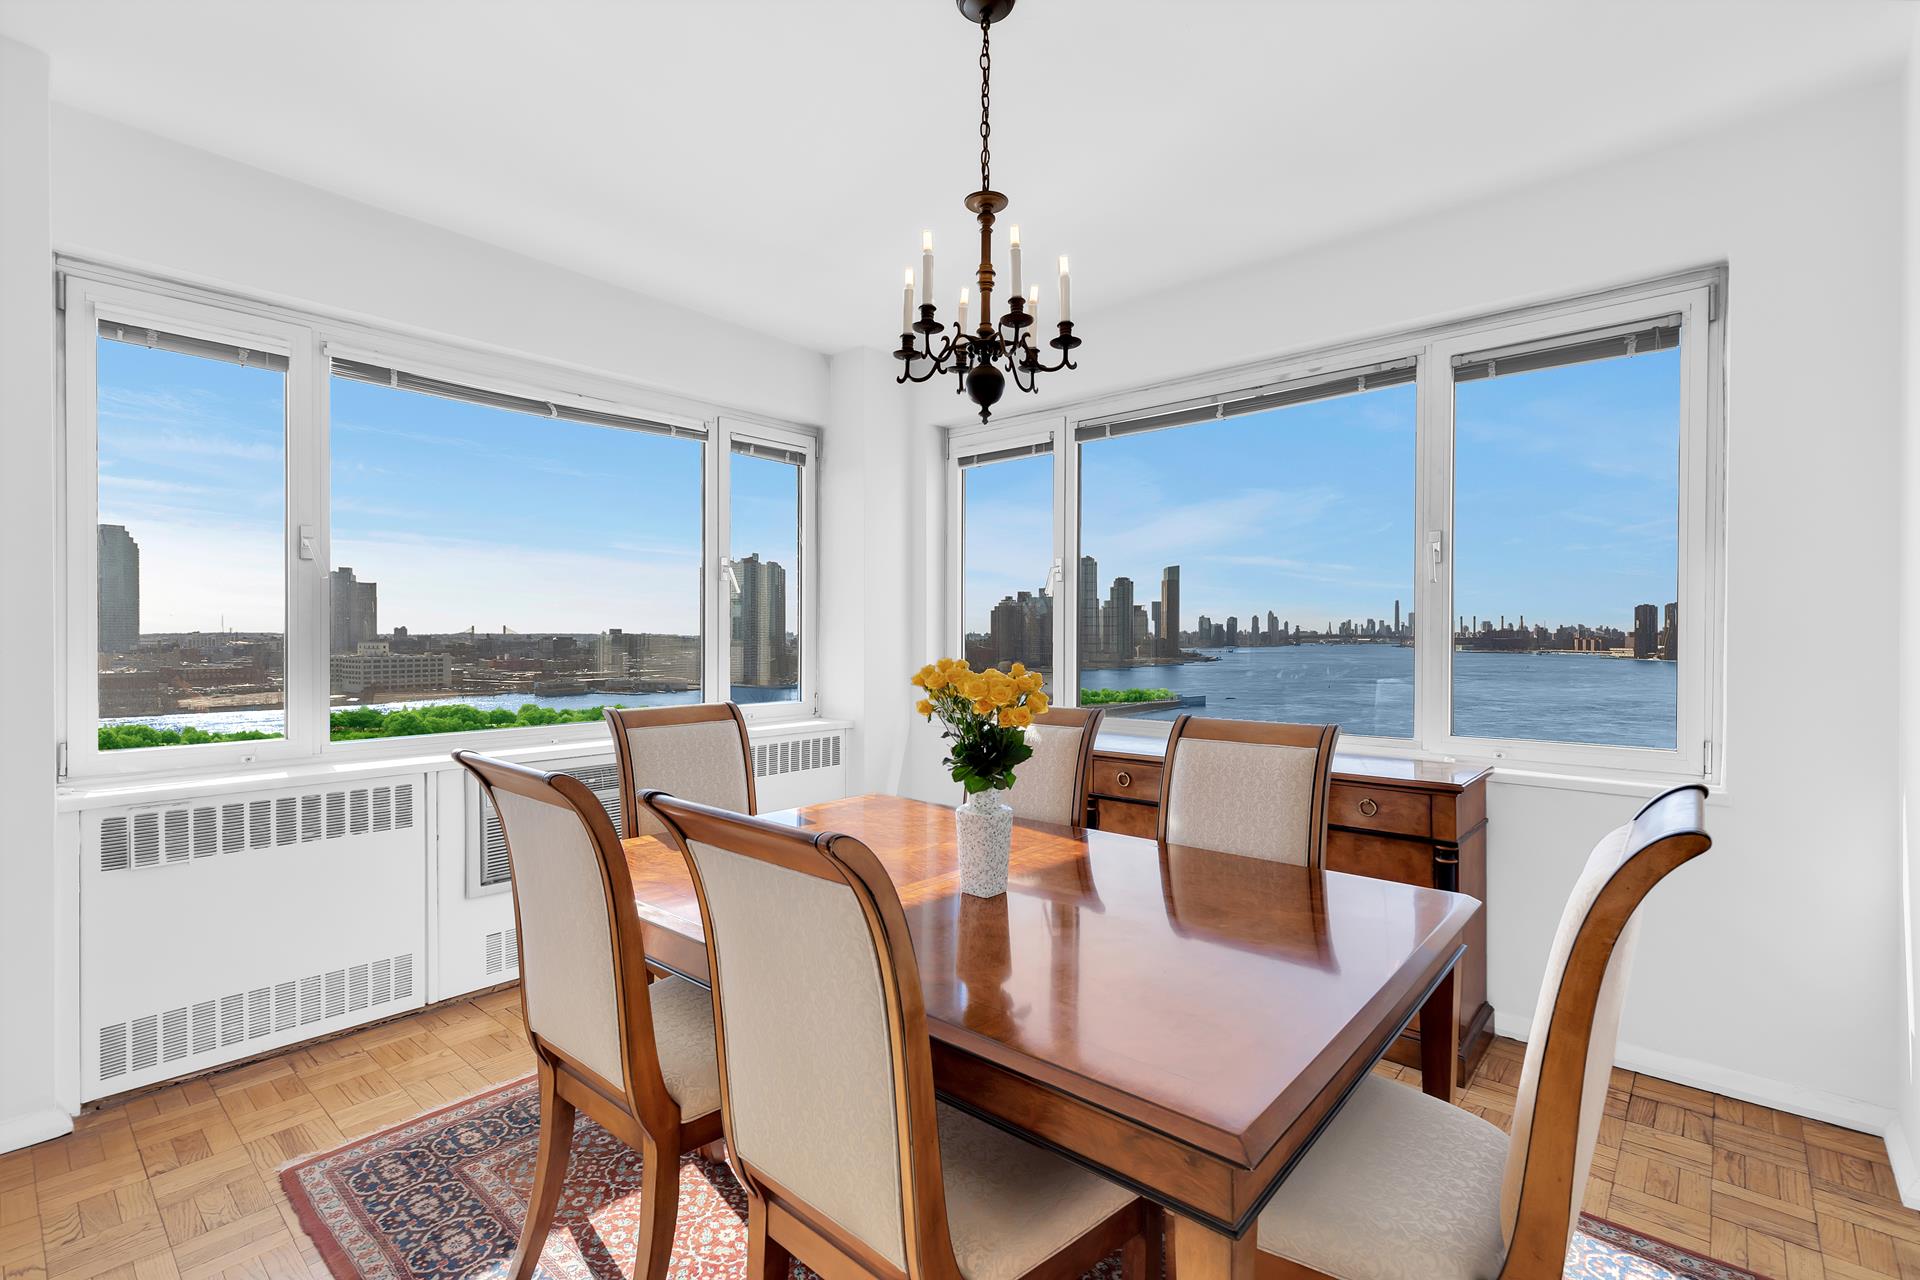 45 Sutton Place 17Fspl, Sutton, Midtown East, NYC - 3 Bedrooms  
3 Bathrooms  
7 Rooms - 